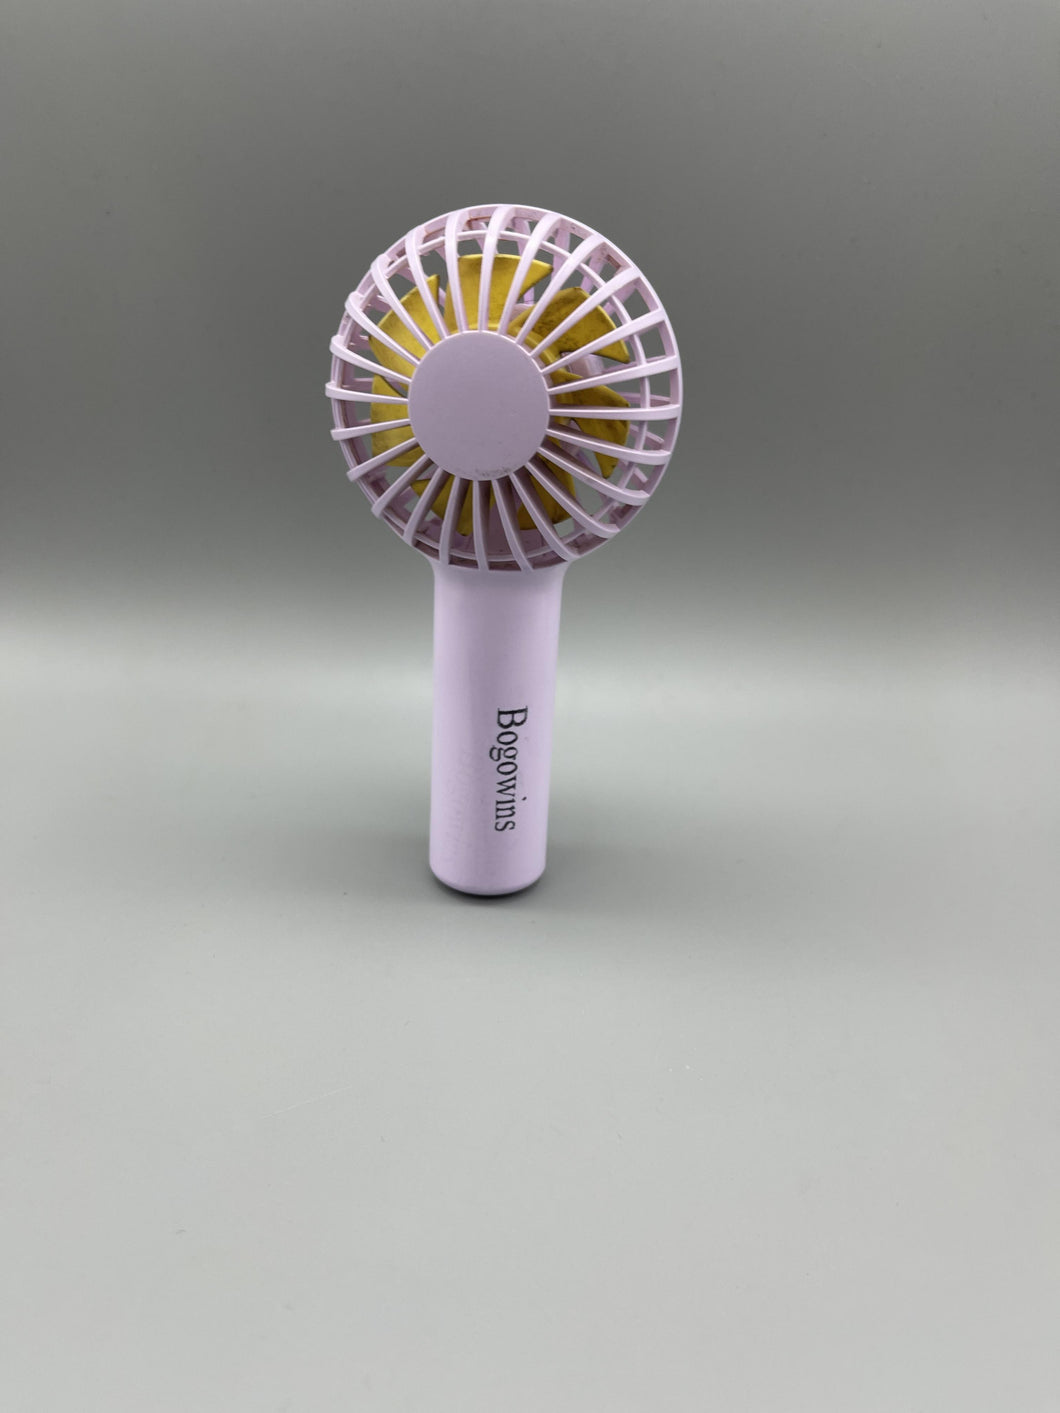 Bogowins Electric fans for personal use,Mini Fan Battery Operated Handheld Fan with 2000 mAh Battery or USB Powered Personal Mini Fan,3 Speeds,Enhanced Airflow, Rechargeable Quiet Pocket Fan for Home,Purple